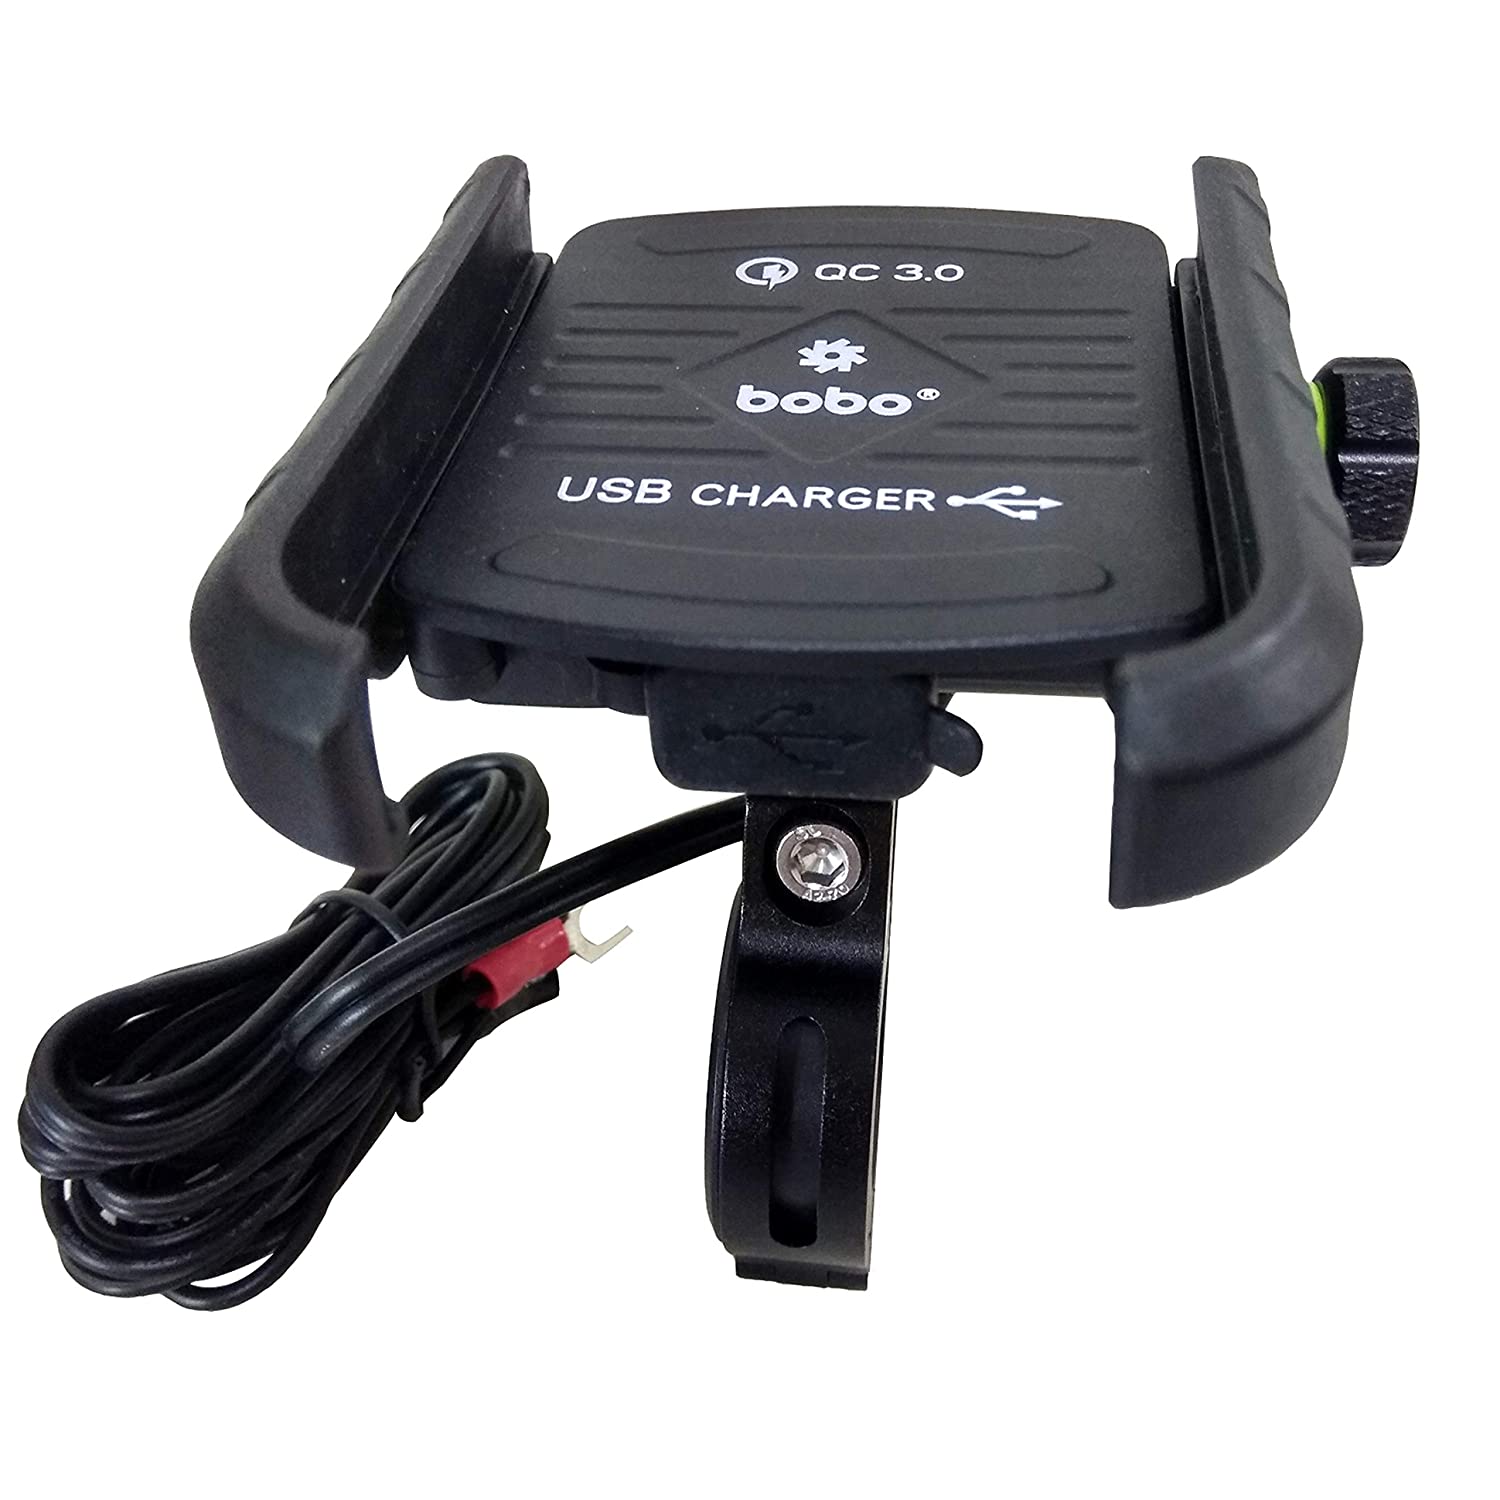 BOBO Jaw-Grip Bike Phone Holder (with fast USB QC3.0 charger